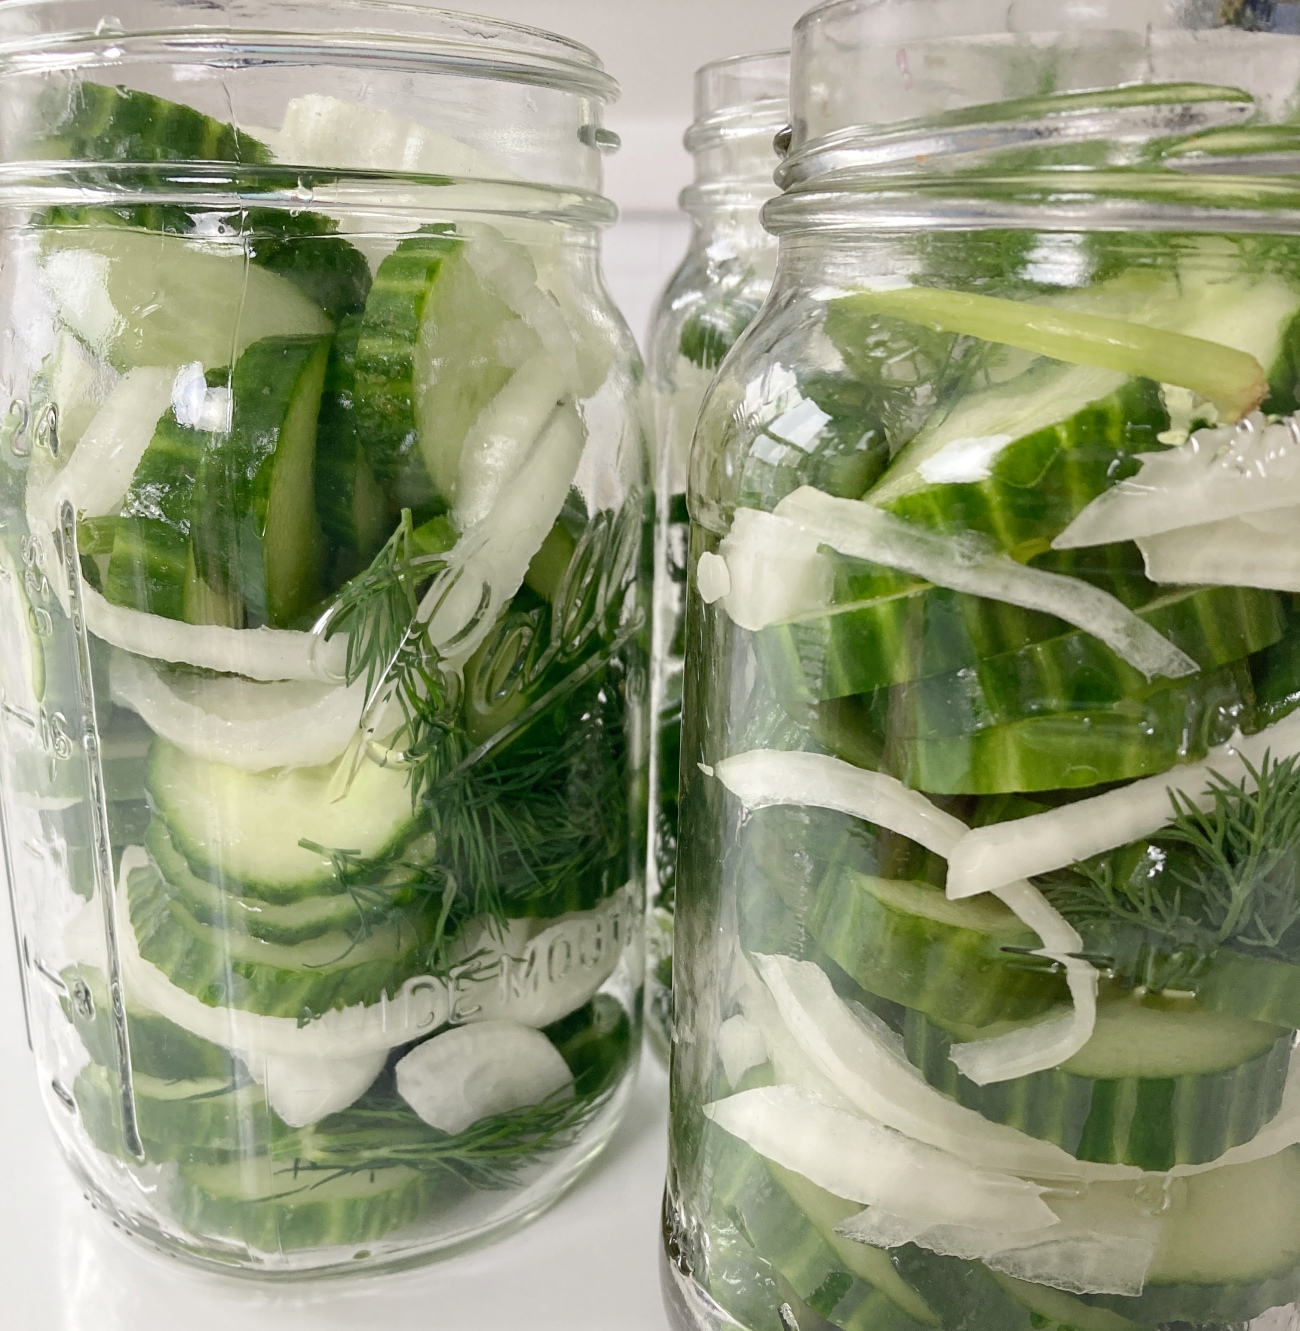 Layer cucumber, onion, and dill into 2 3-quart jars. Add remaining ingredients to stainless steel or enameled saucepan and bring to a boil. Cook until salt and sugar have dissolved, about 3-5 minutes.